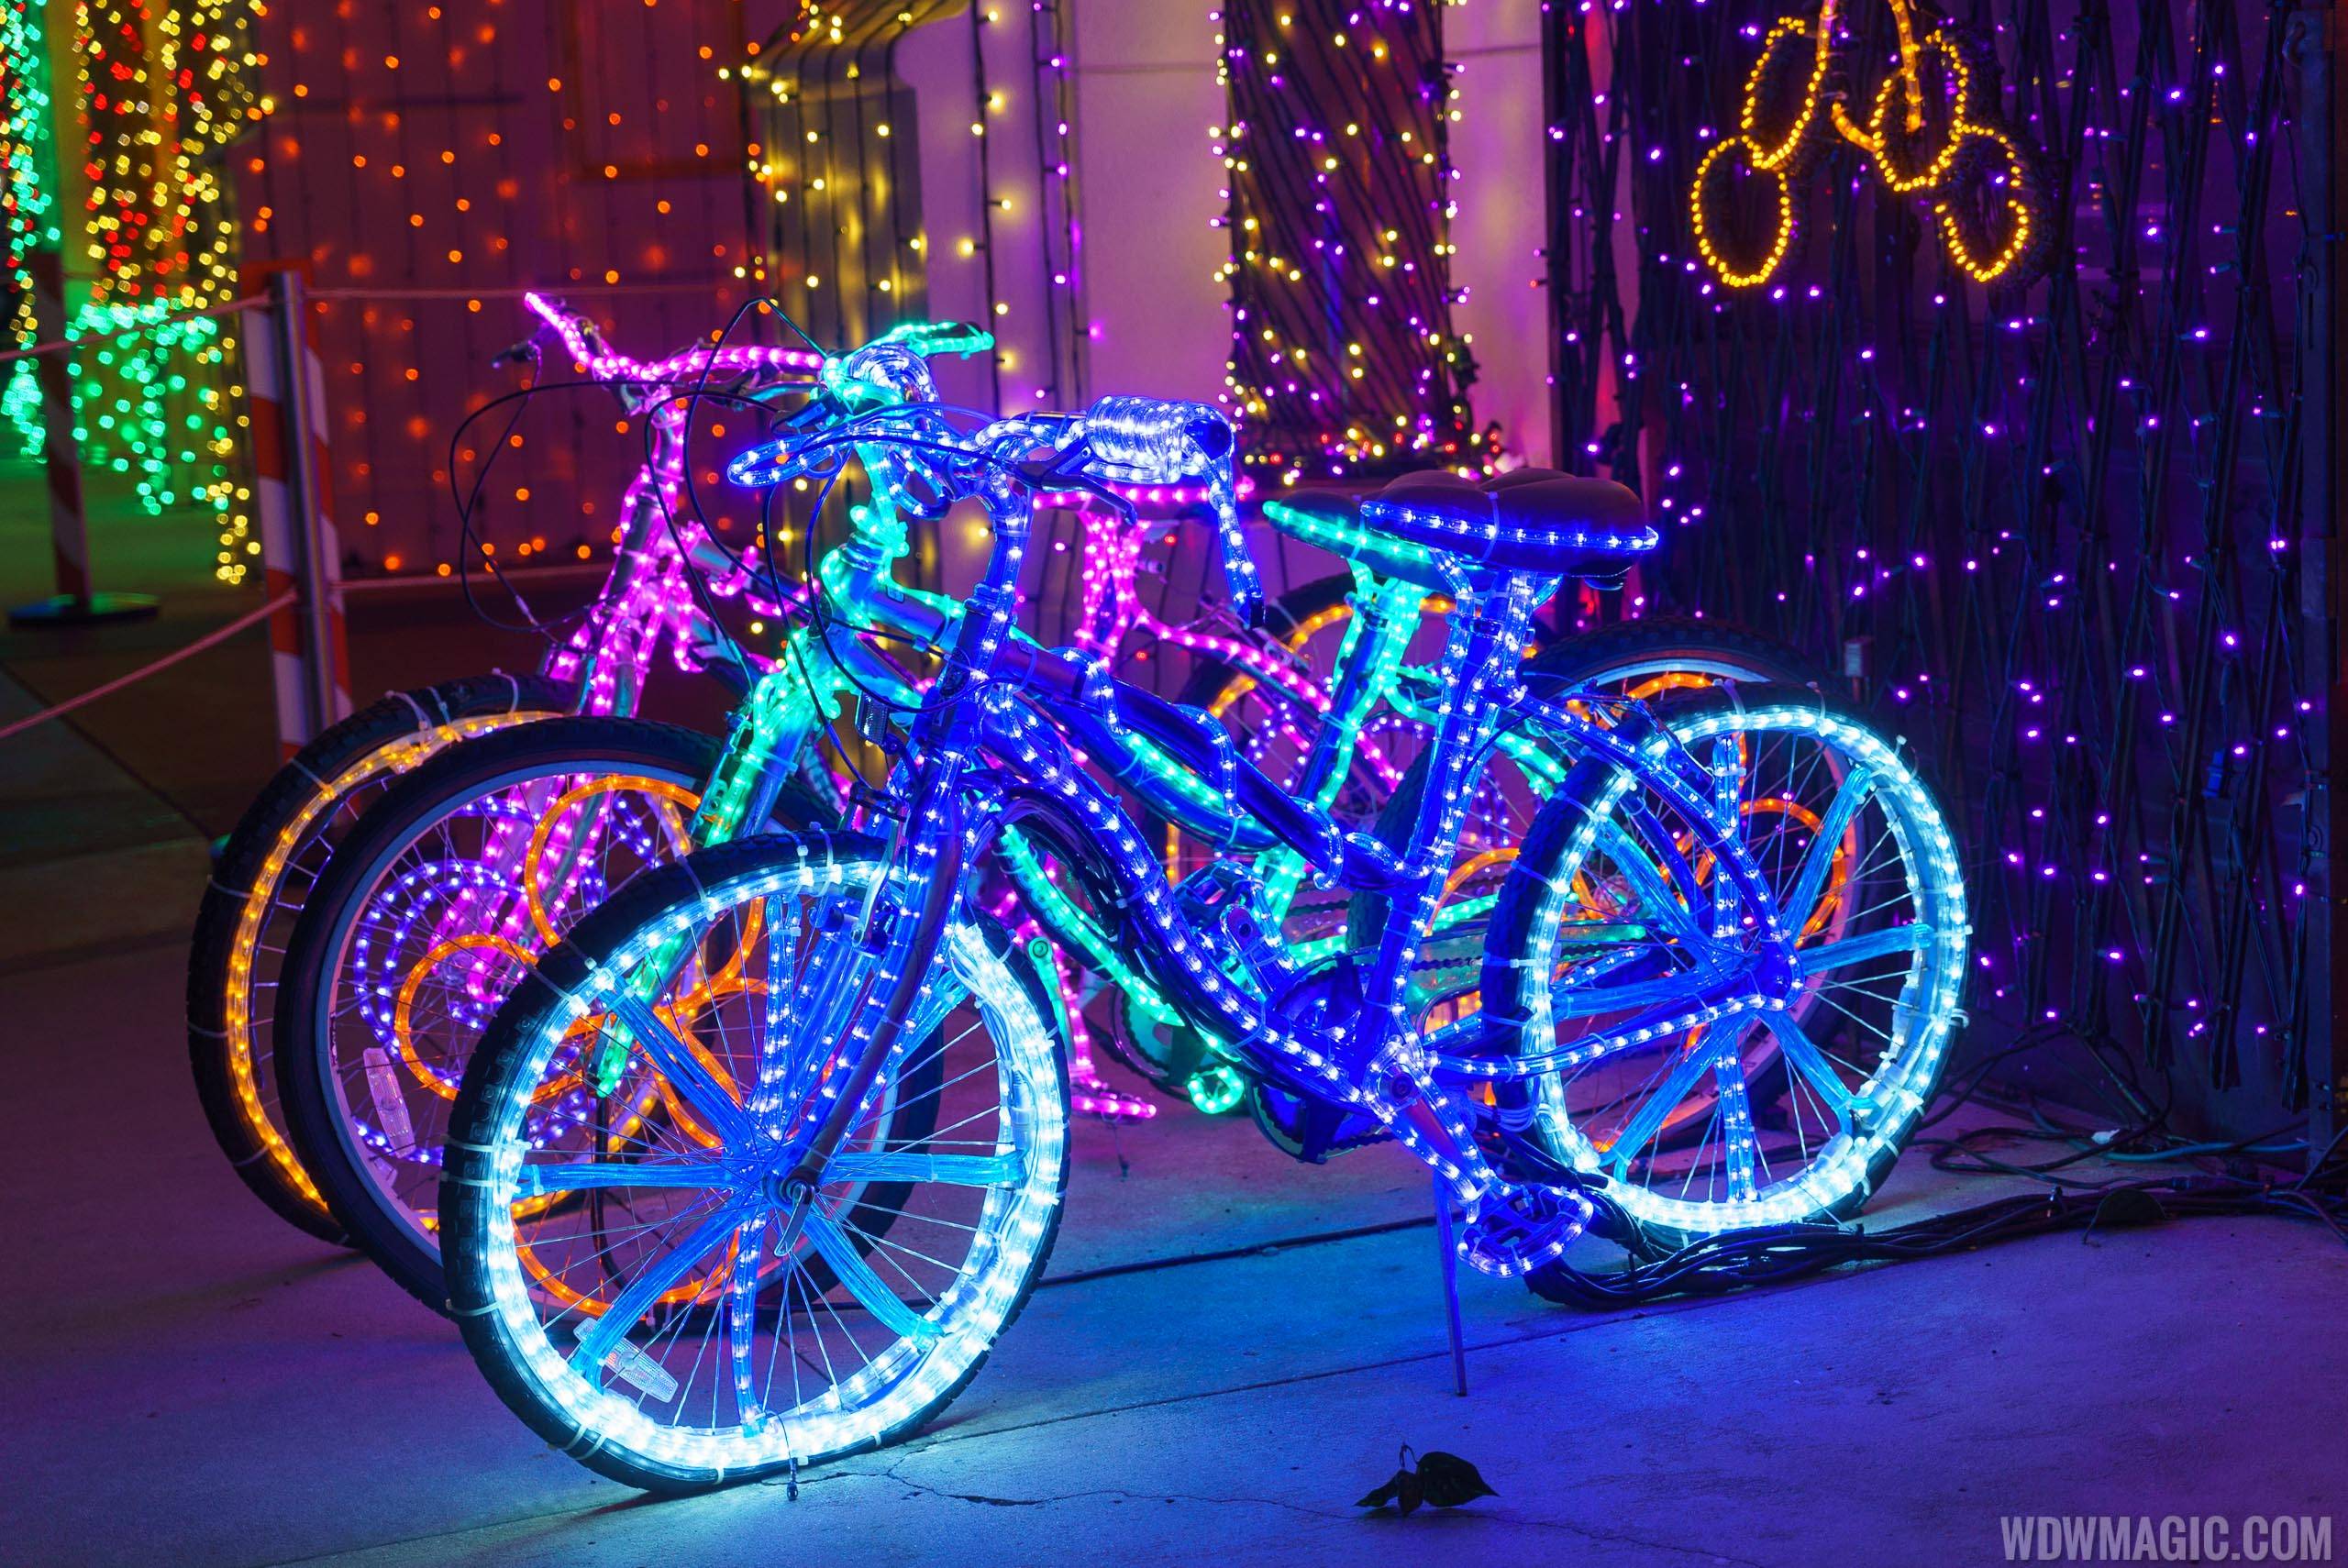 Even the bikes were decorated with lights